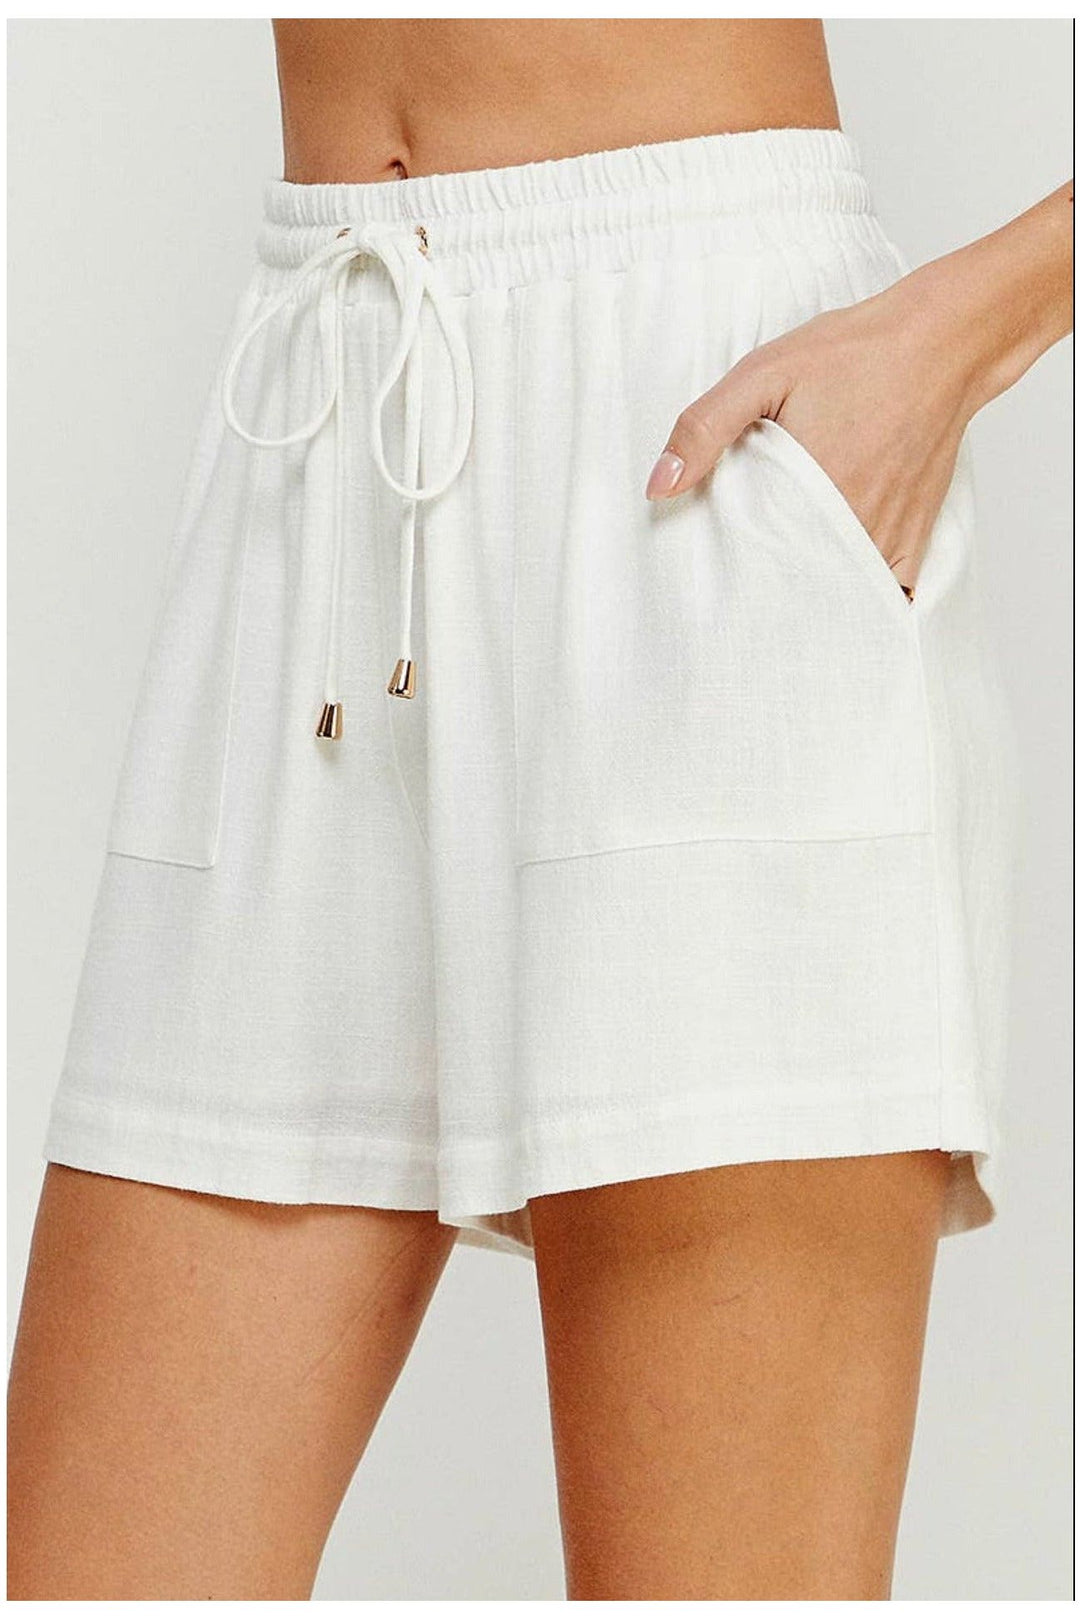 Off White Linen blend Tie Shorts-Bottoms-Allie Rose-Vintage Dragonfly-Women’s Fashion Boutique Located in Sumrall, Mississippi